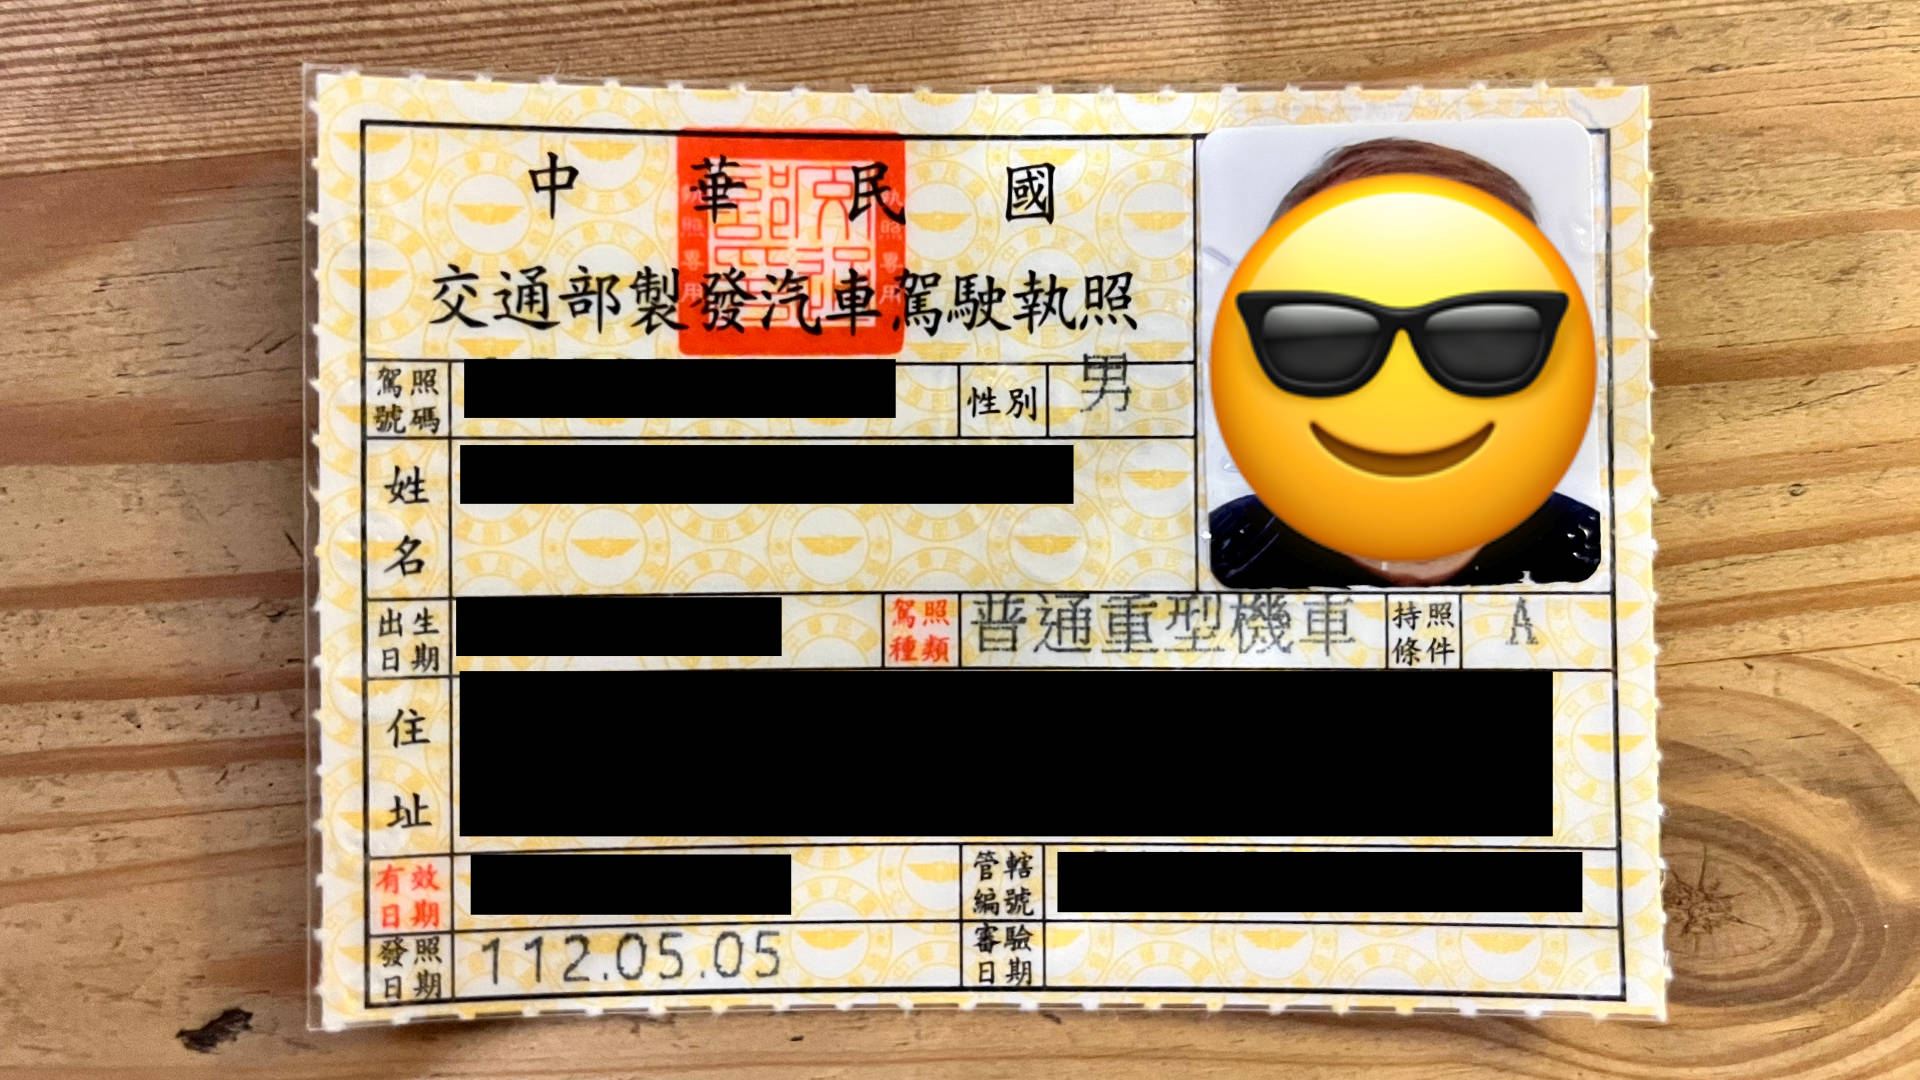 The front side of a Taiwanese driver’s license.